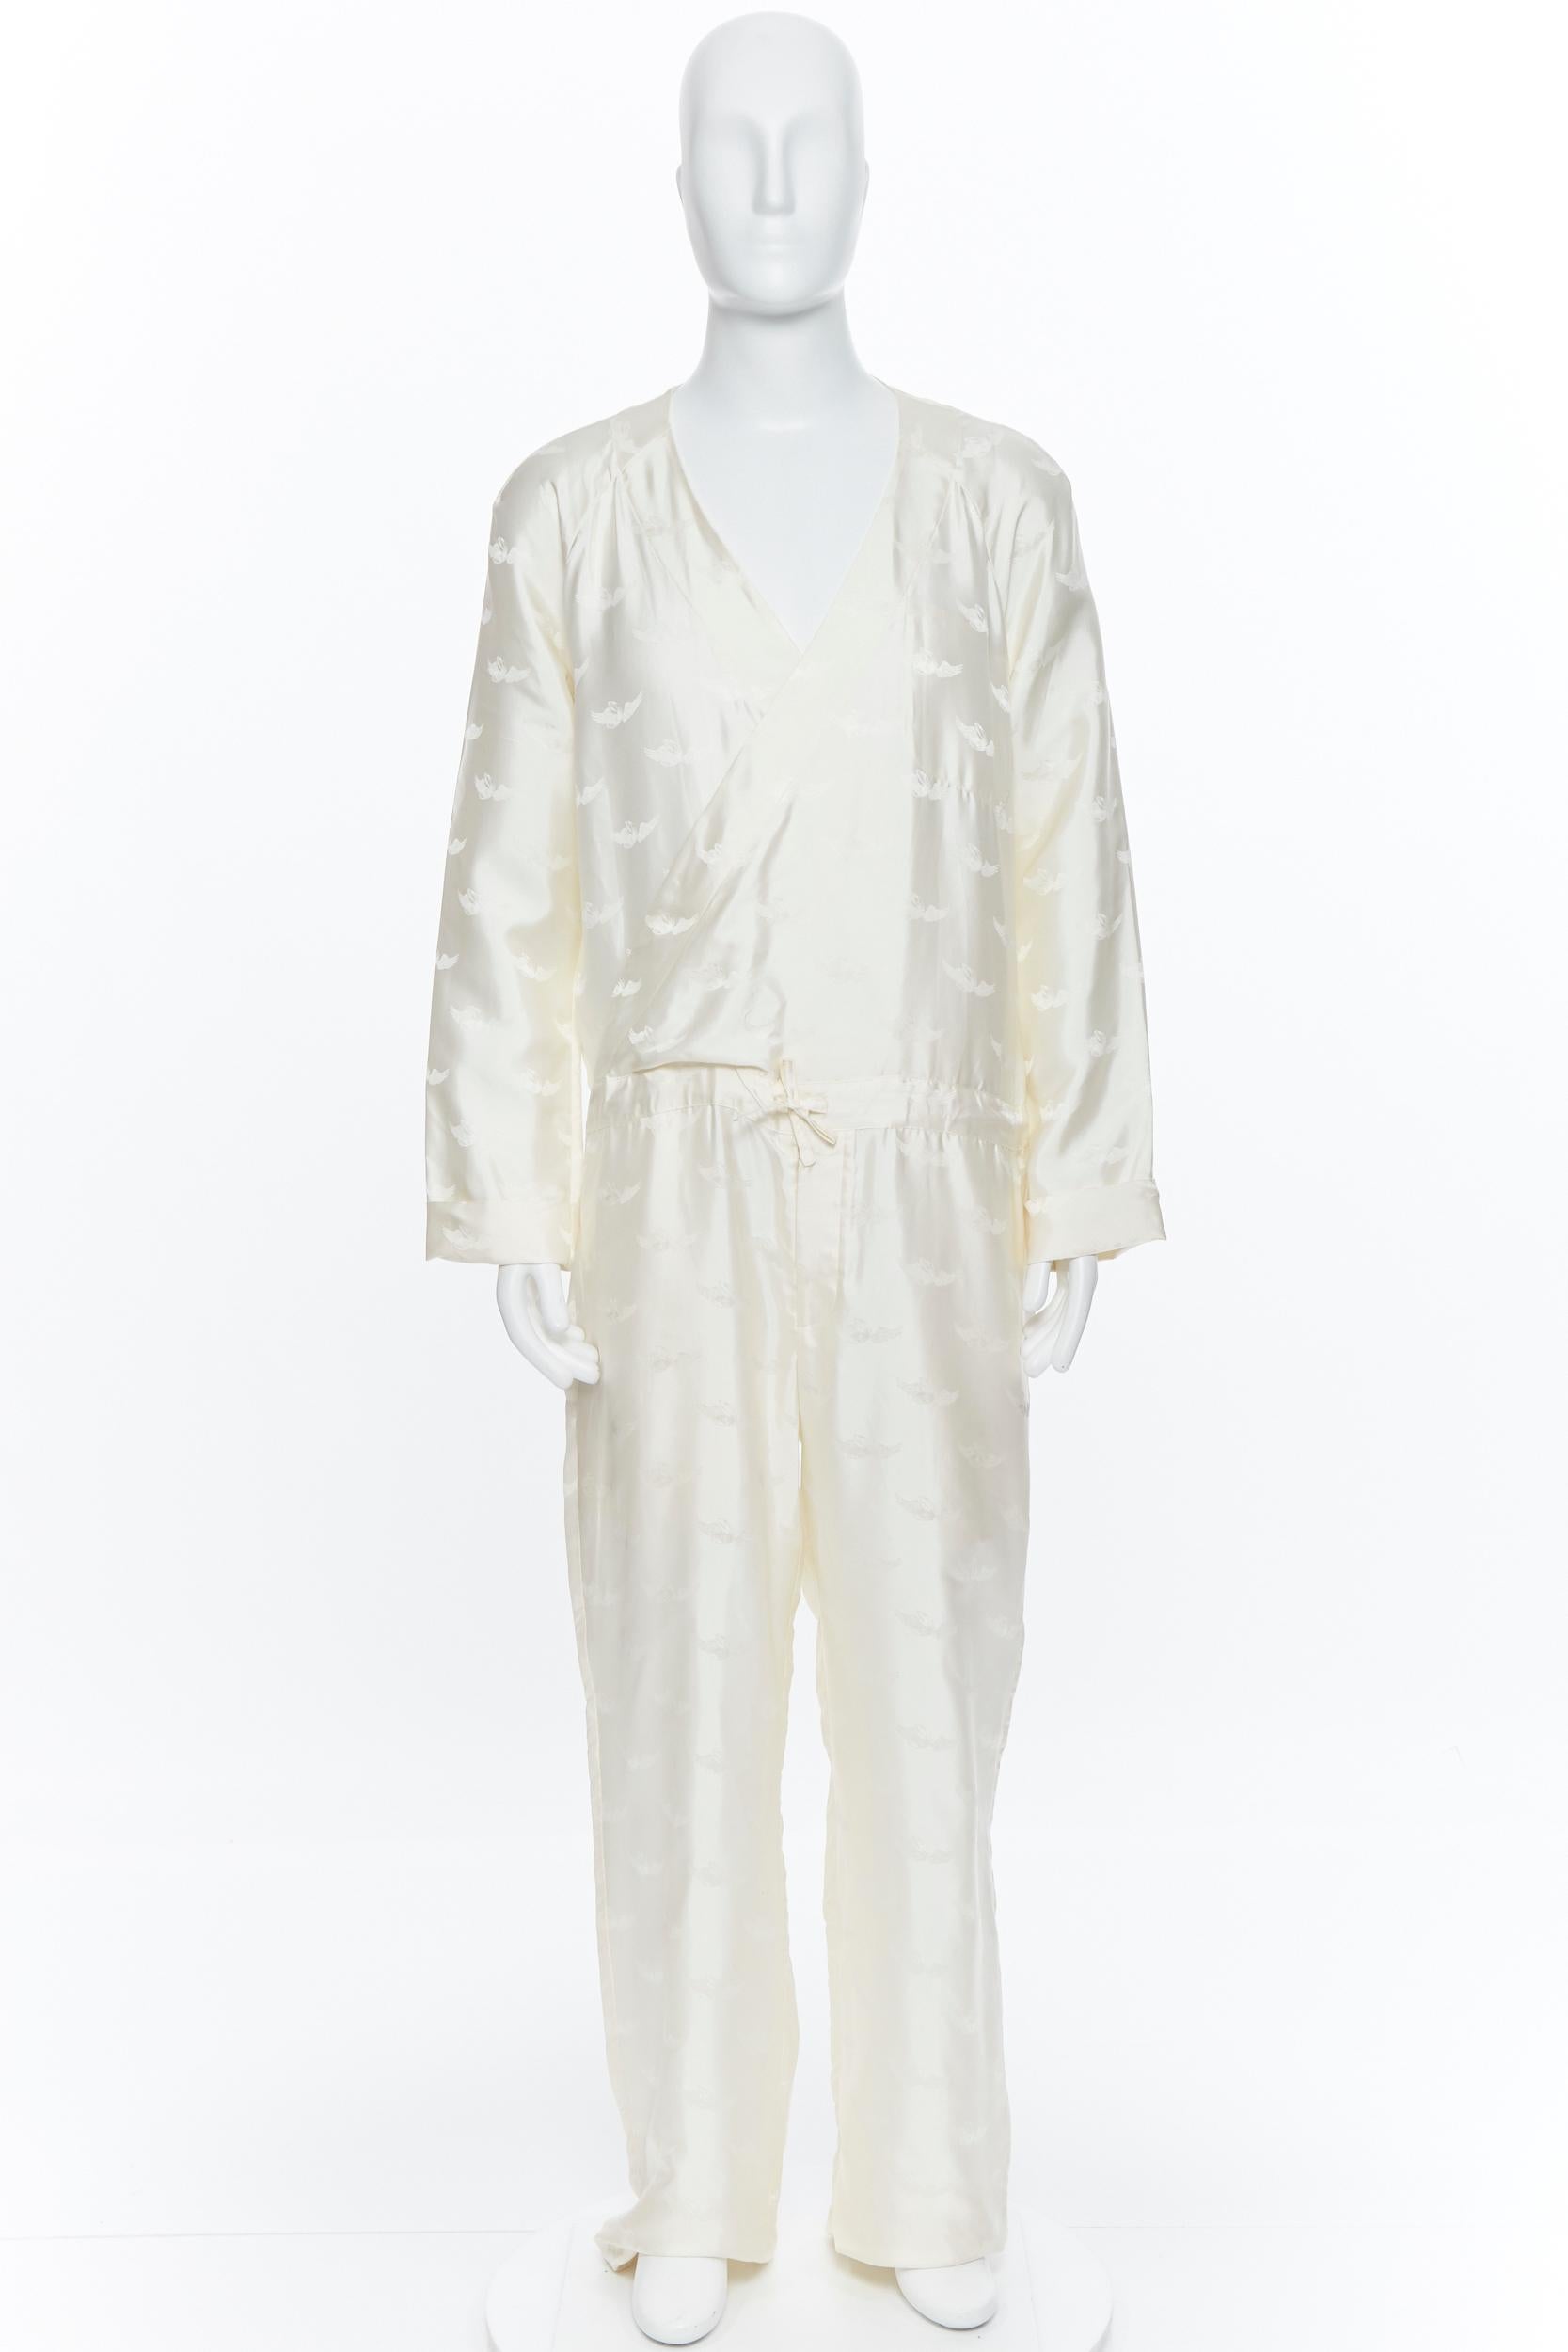 new LA PERLA MENSWEAR 100% silk cream beige winged jacquard V-neck jumpsuit M
Brand: La Perla
Collection: Spring Summer 2015
Model Name / Style: Silk jumpsuit
Material: Silk
Color: White
Pattern: Abstract; winged jacquard
Extra Detail: Can be worn